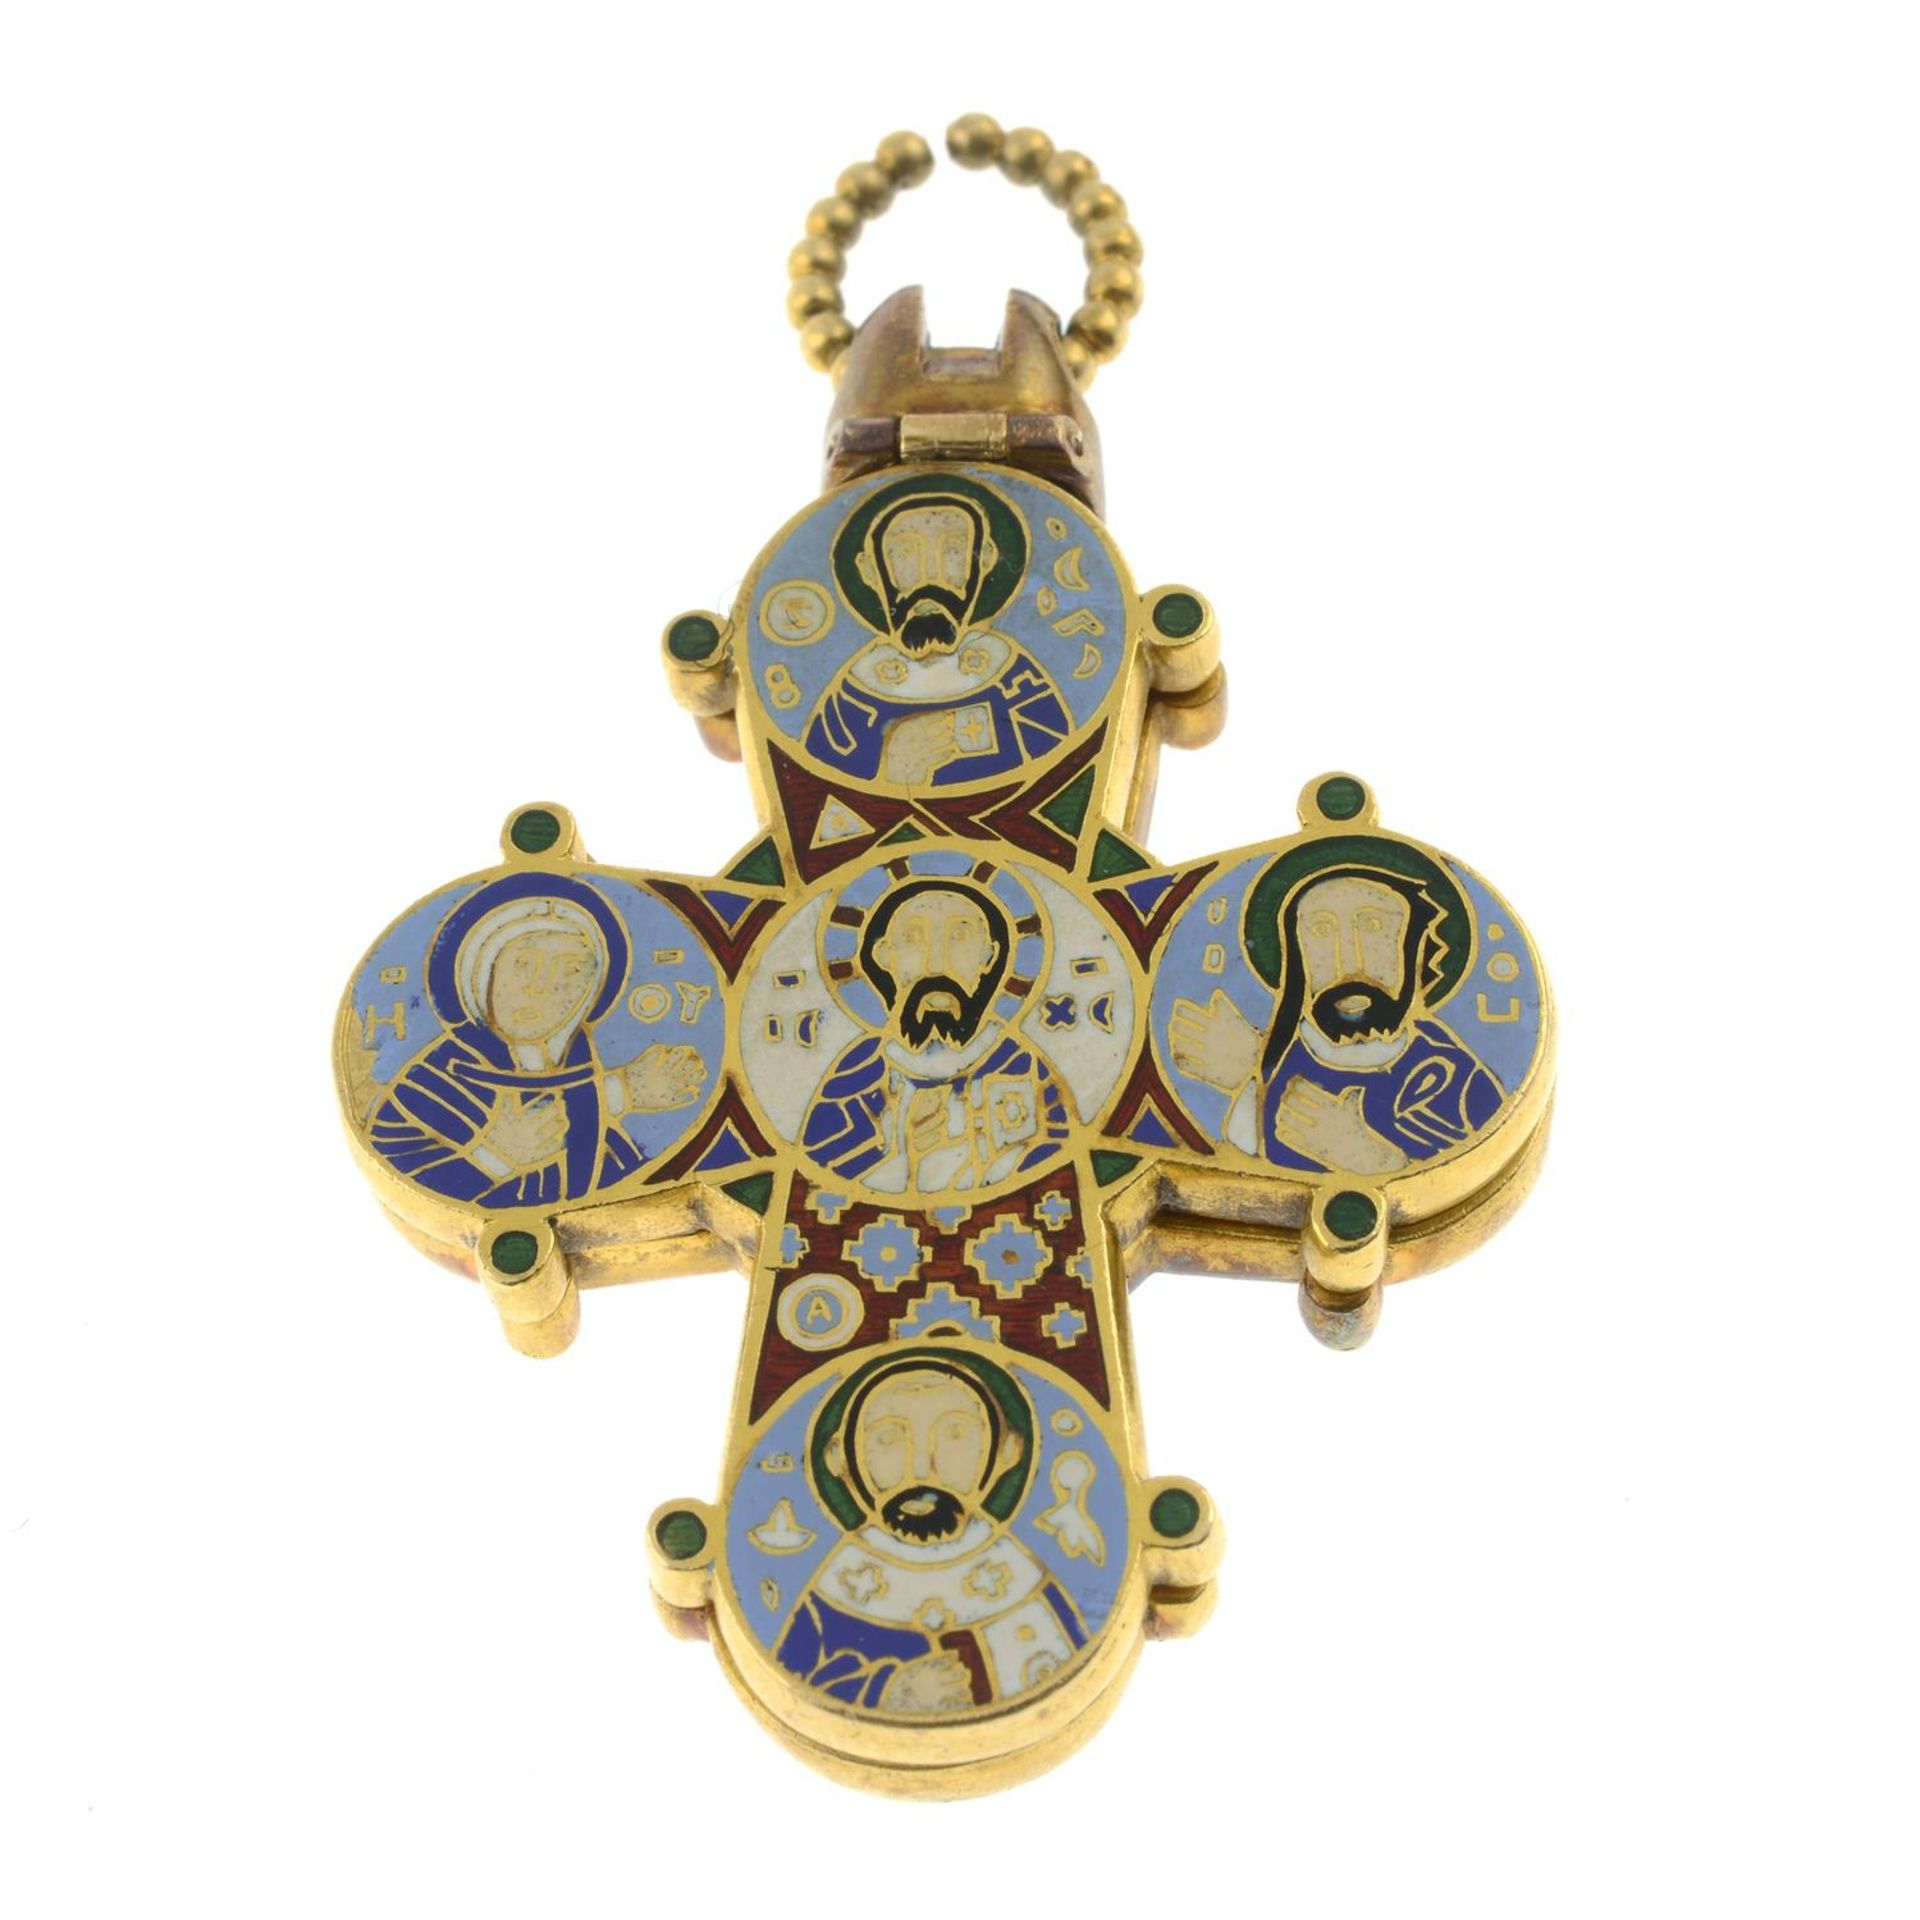 A mid to late 19th century 18ct gold enamel replica Dagmar Cross pendant, by Borgen & Co. - Image 3 of 5